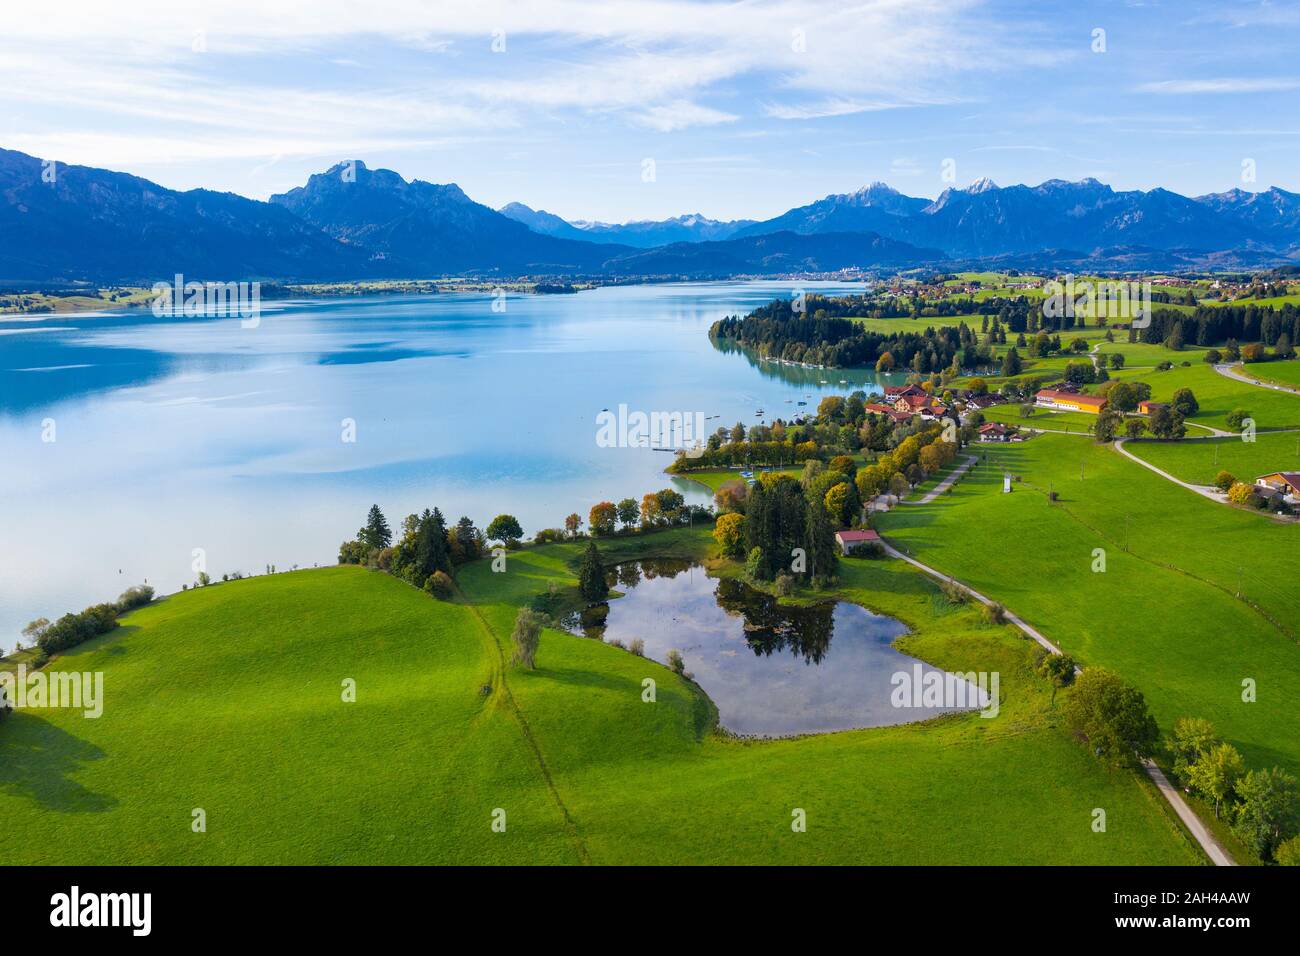 Germany, Bavaria, Dietringen, Aerial view of Forggensee lake with mountains in background Stock Photo